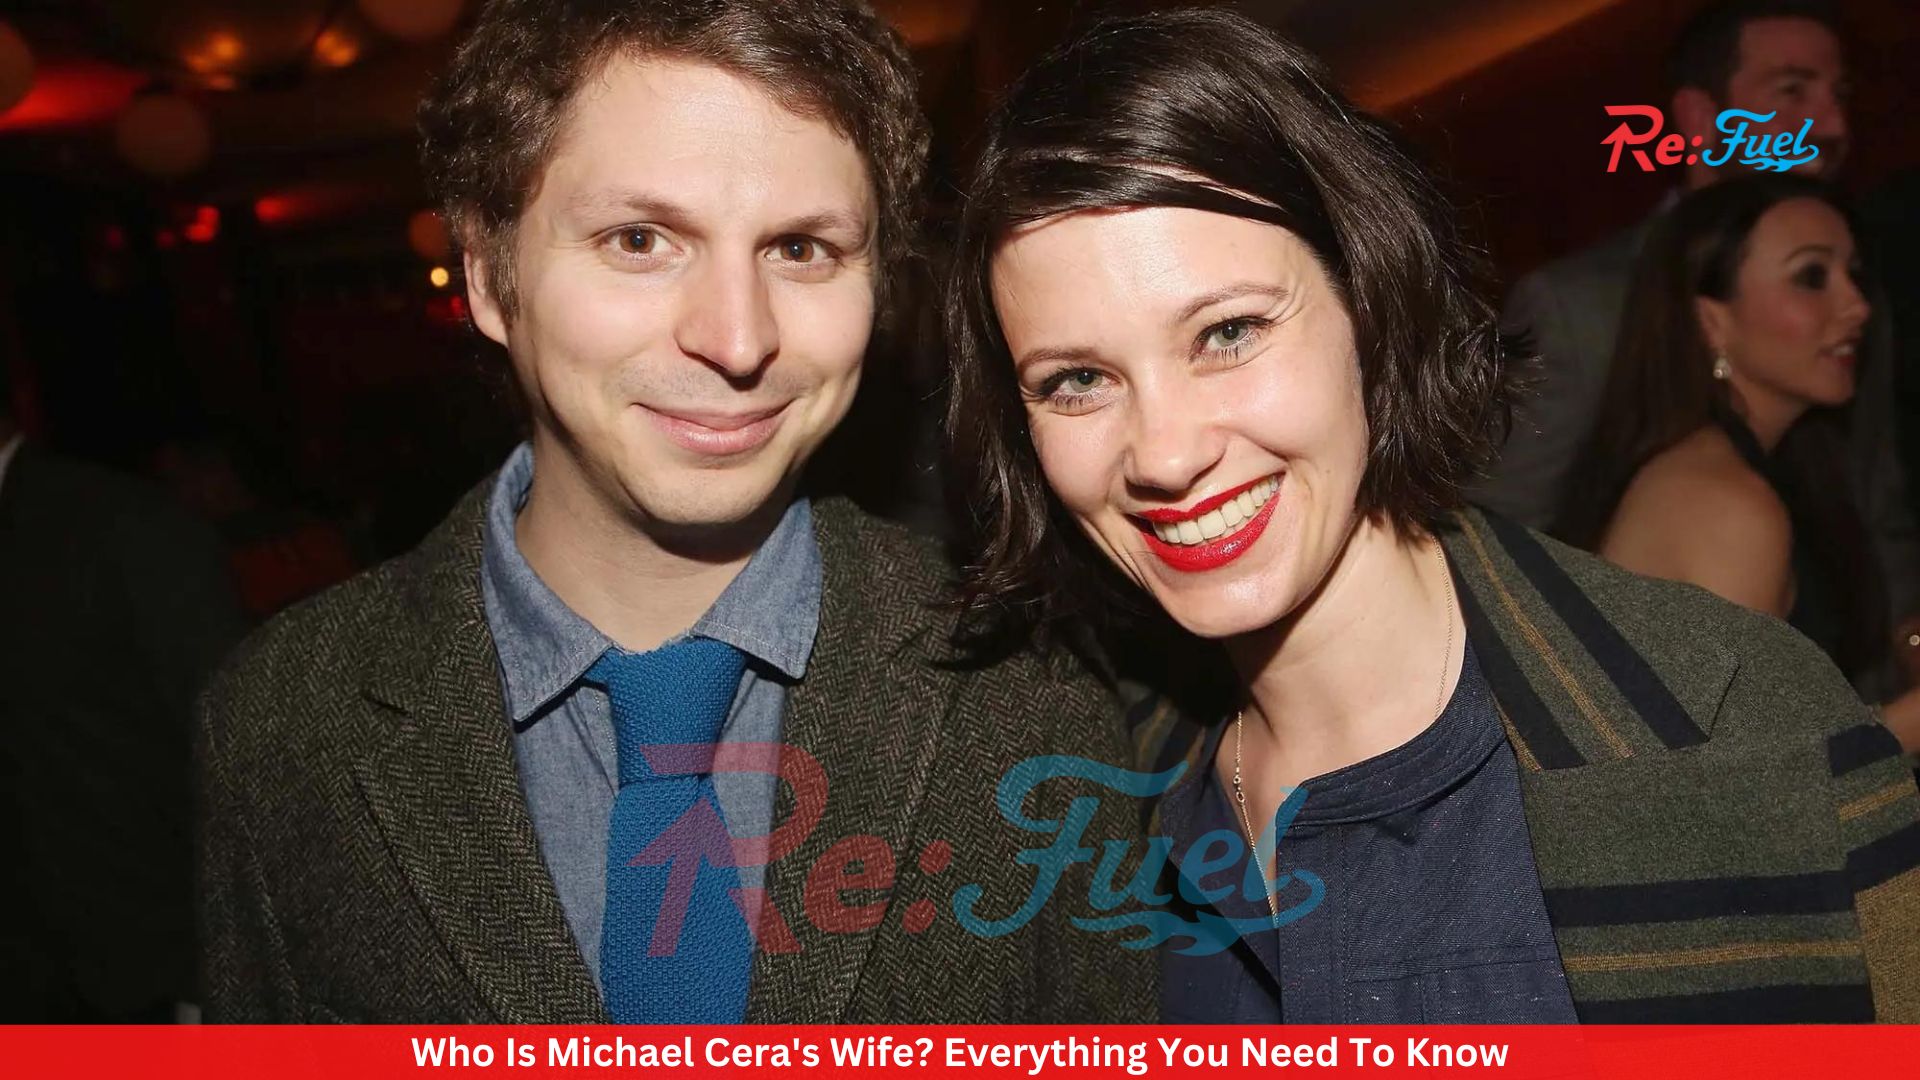 Who Is Michael Cera's Wife? Everything You Need To Know